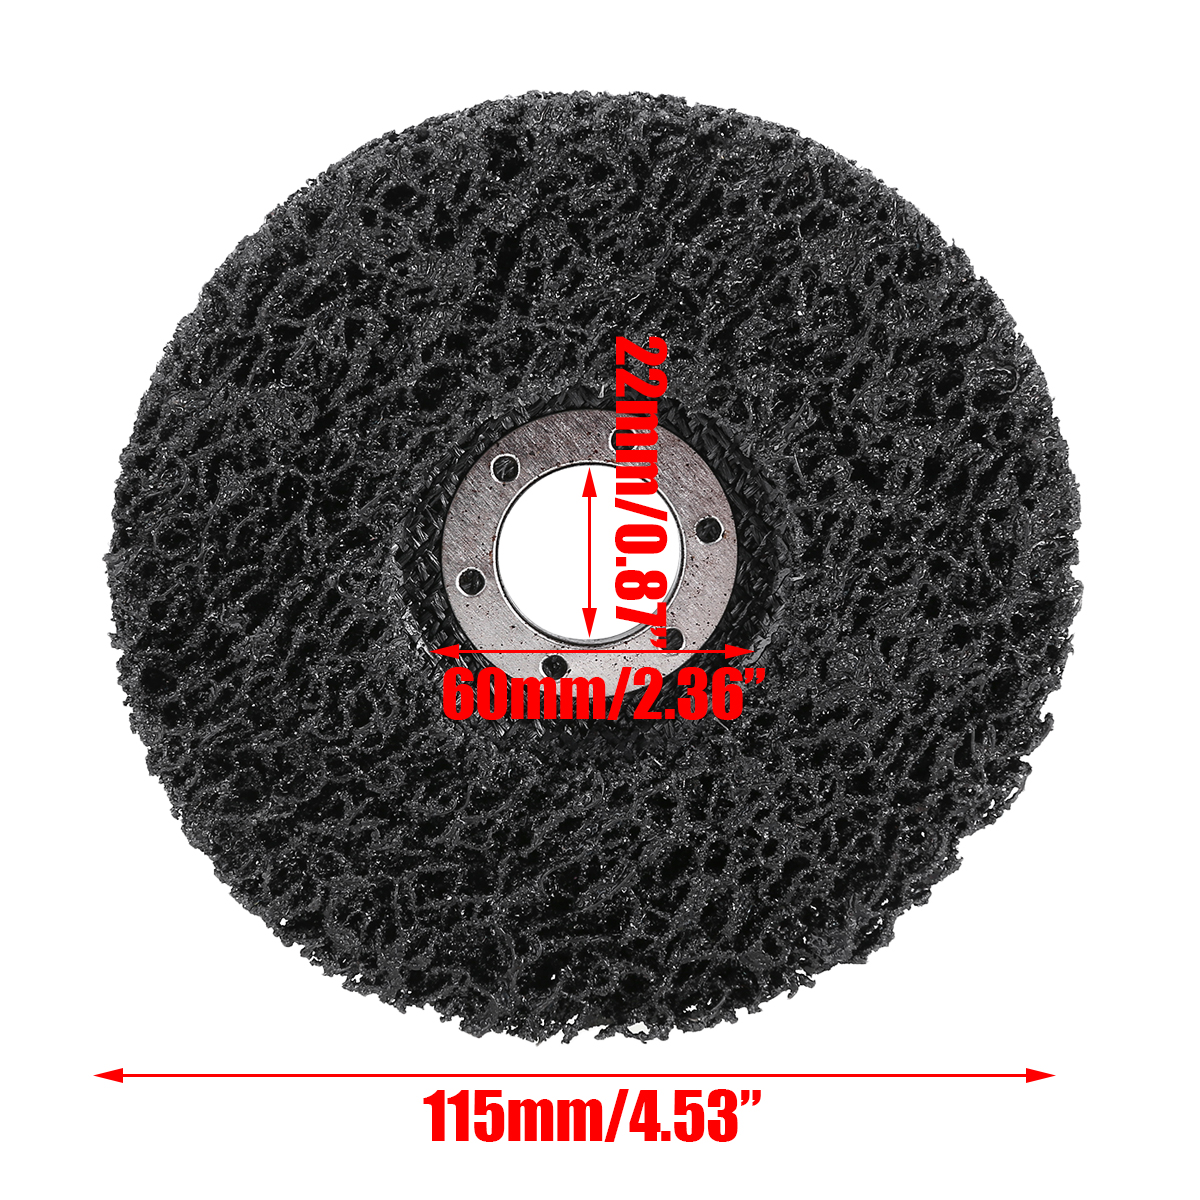 5Pcs Disc Grit Polishing Grinding Wheel Pad Angle Grinder Car Clean Paint Rust Abrasive Angle Power Tools Grinding Wheel